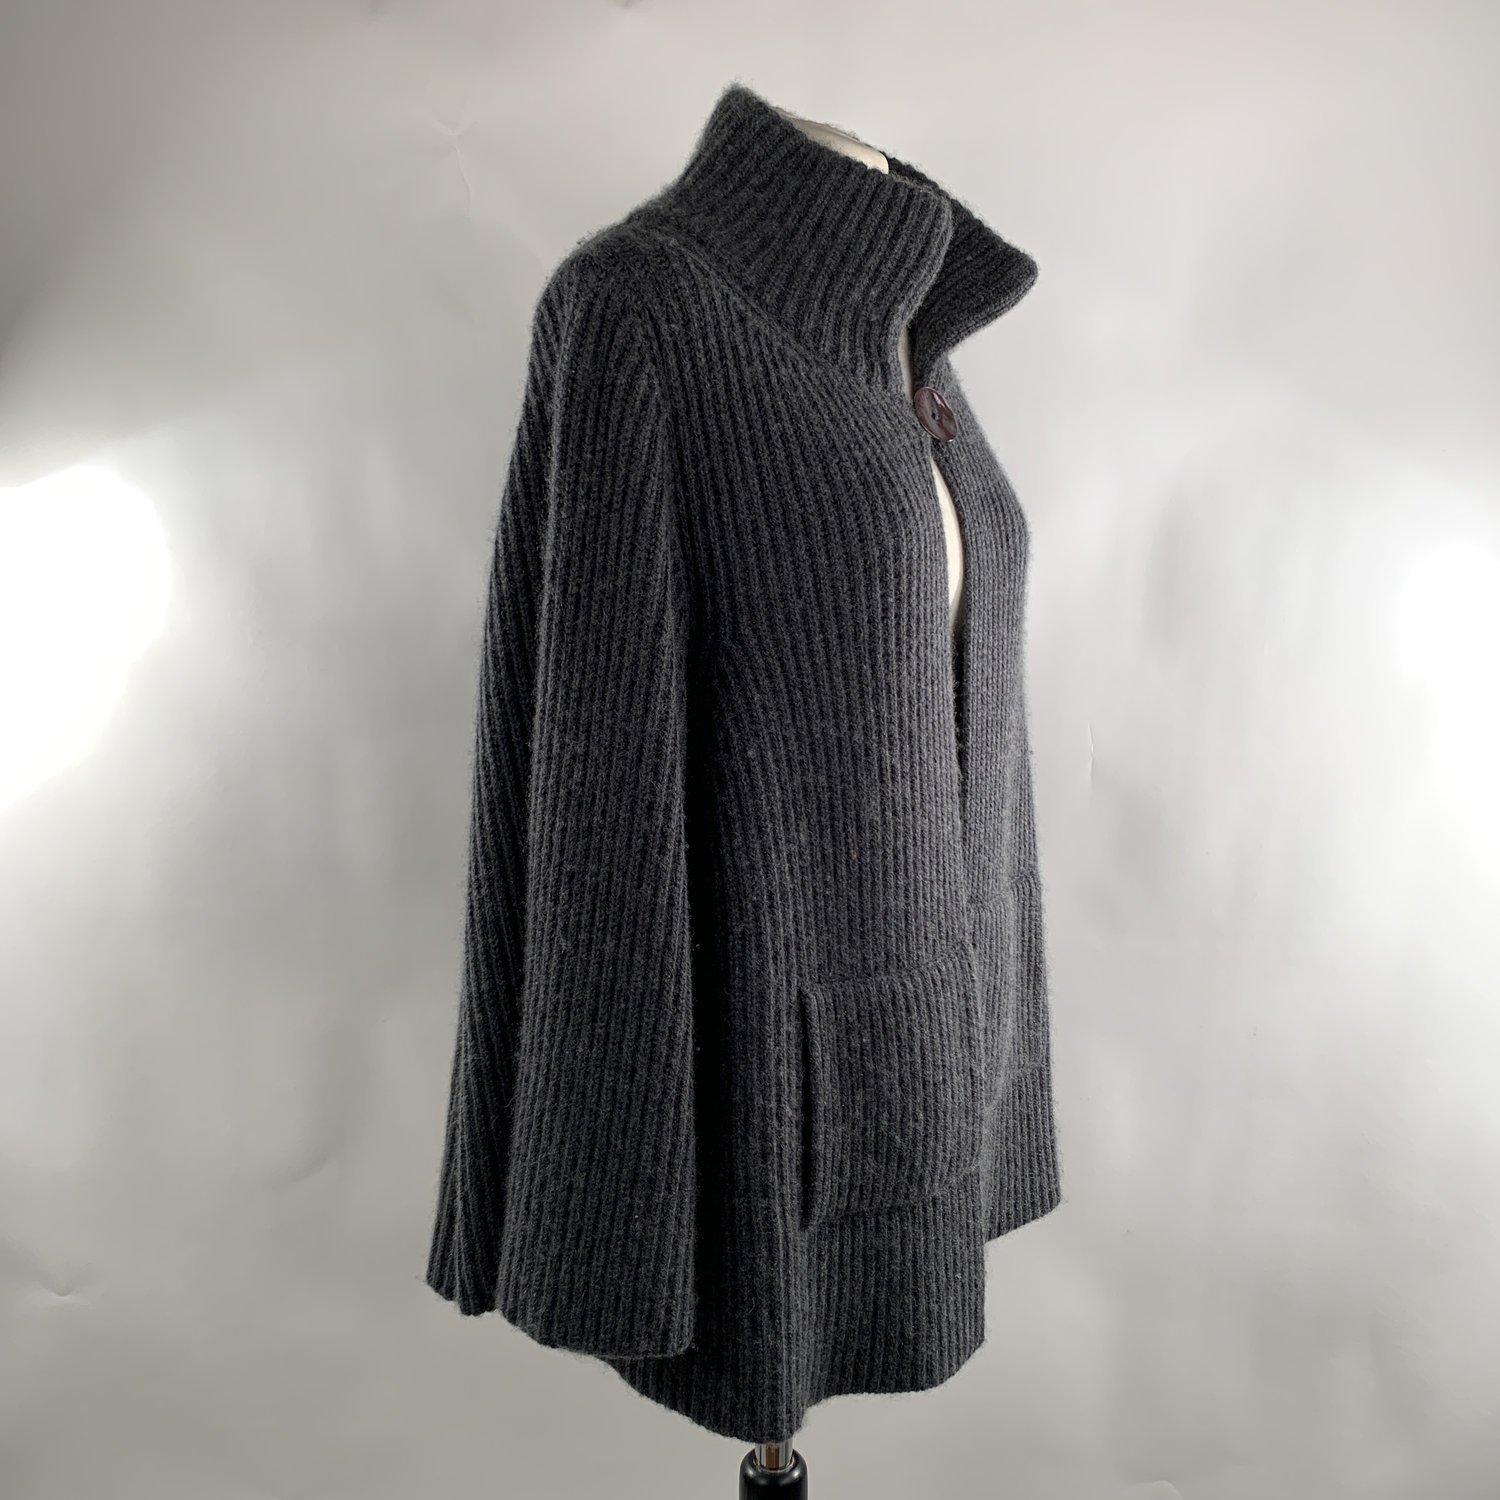 In short Nobili Milano Gray Ribbed Wool Knit Jacket Cardigan.Composition: 54% Cashmere 46% Cotton. Front button closure on the neckline. Long wide sleeve. Size is not indicated. 2 patch pockets on the front. Estimated size is a MEDIUM Size Details